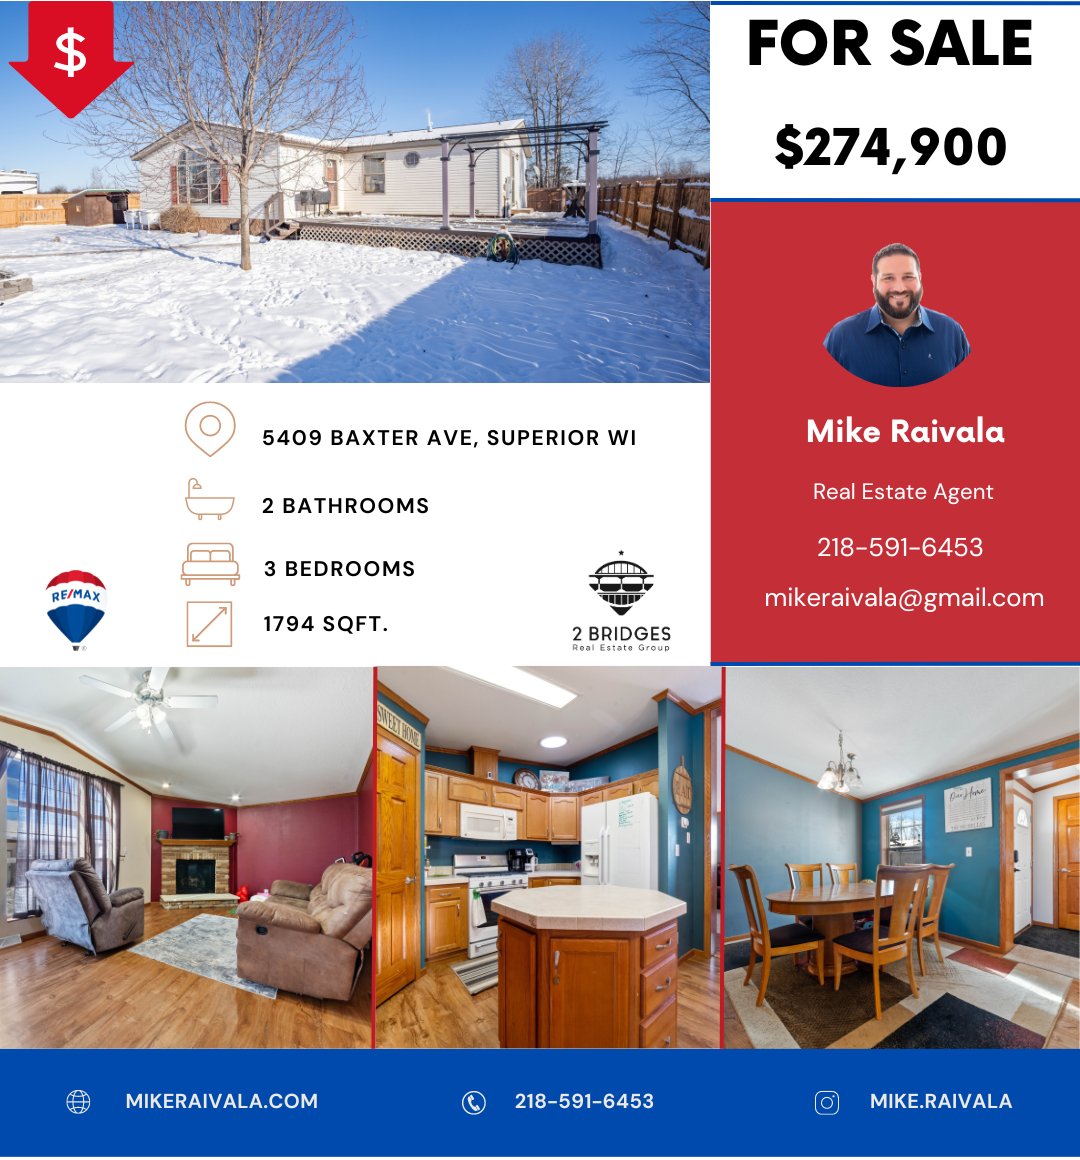 ** Price Improvement ** 
Check it out below; 
remax.com/wi/superior/ho…
#forsale #priceimprovement #pricedrop #homeforsale #homesale #buyersagent #buyingahome #homebuyers #ForSaleProperties #superiorwi #superiorrealestate #hereforyou #MikeSellsHomes #remaxrealtor #remaxresults